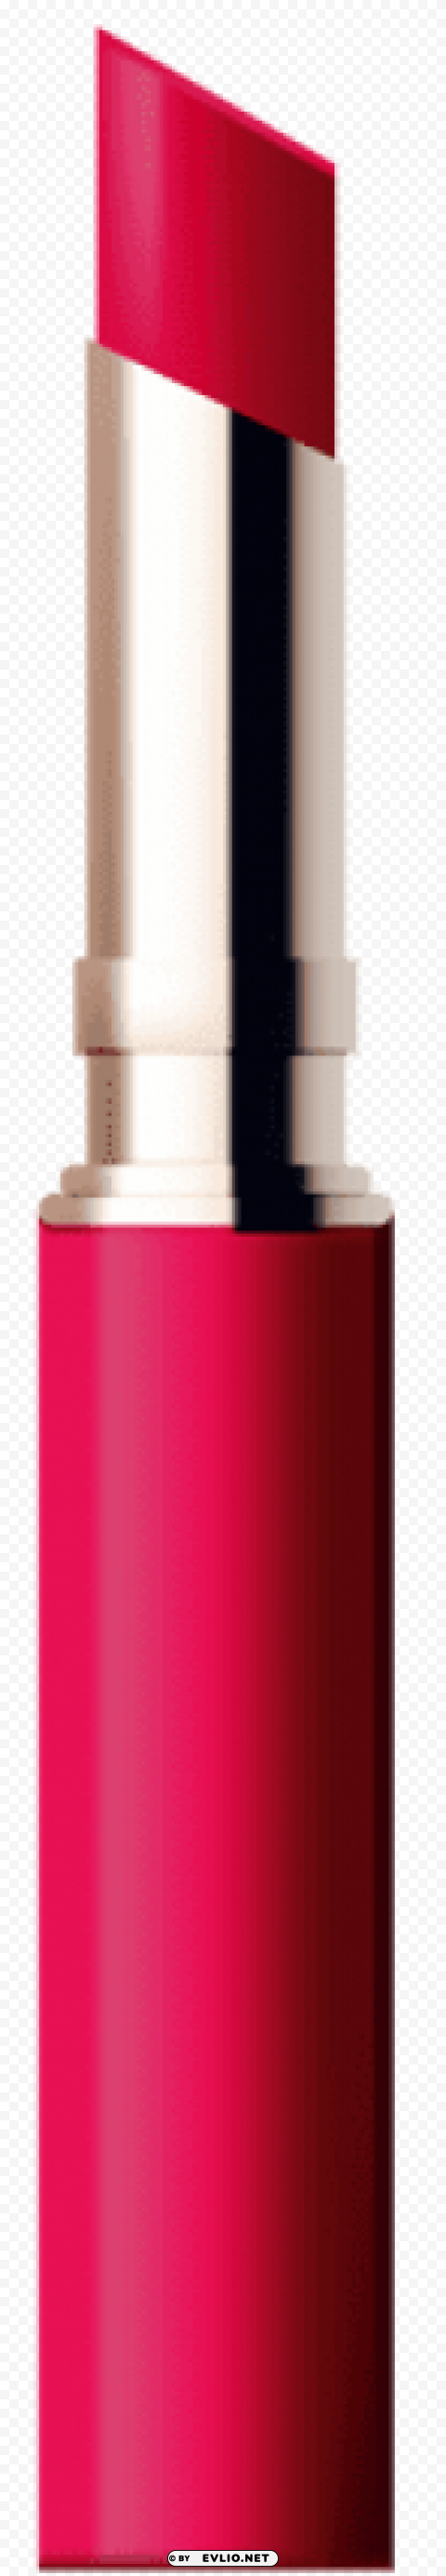 lipstick transparent HighResolution Isolated PNG with Transparency